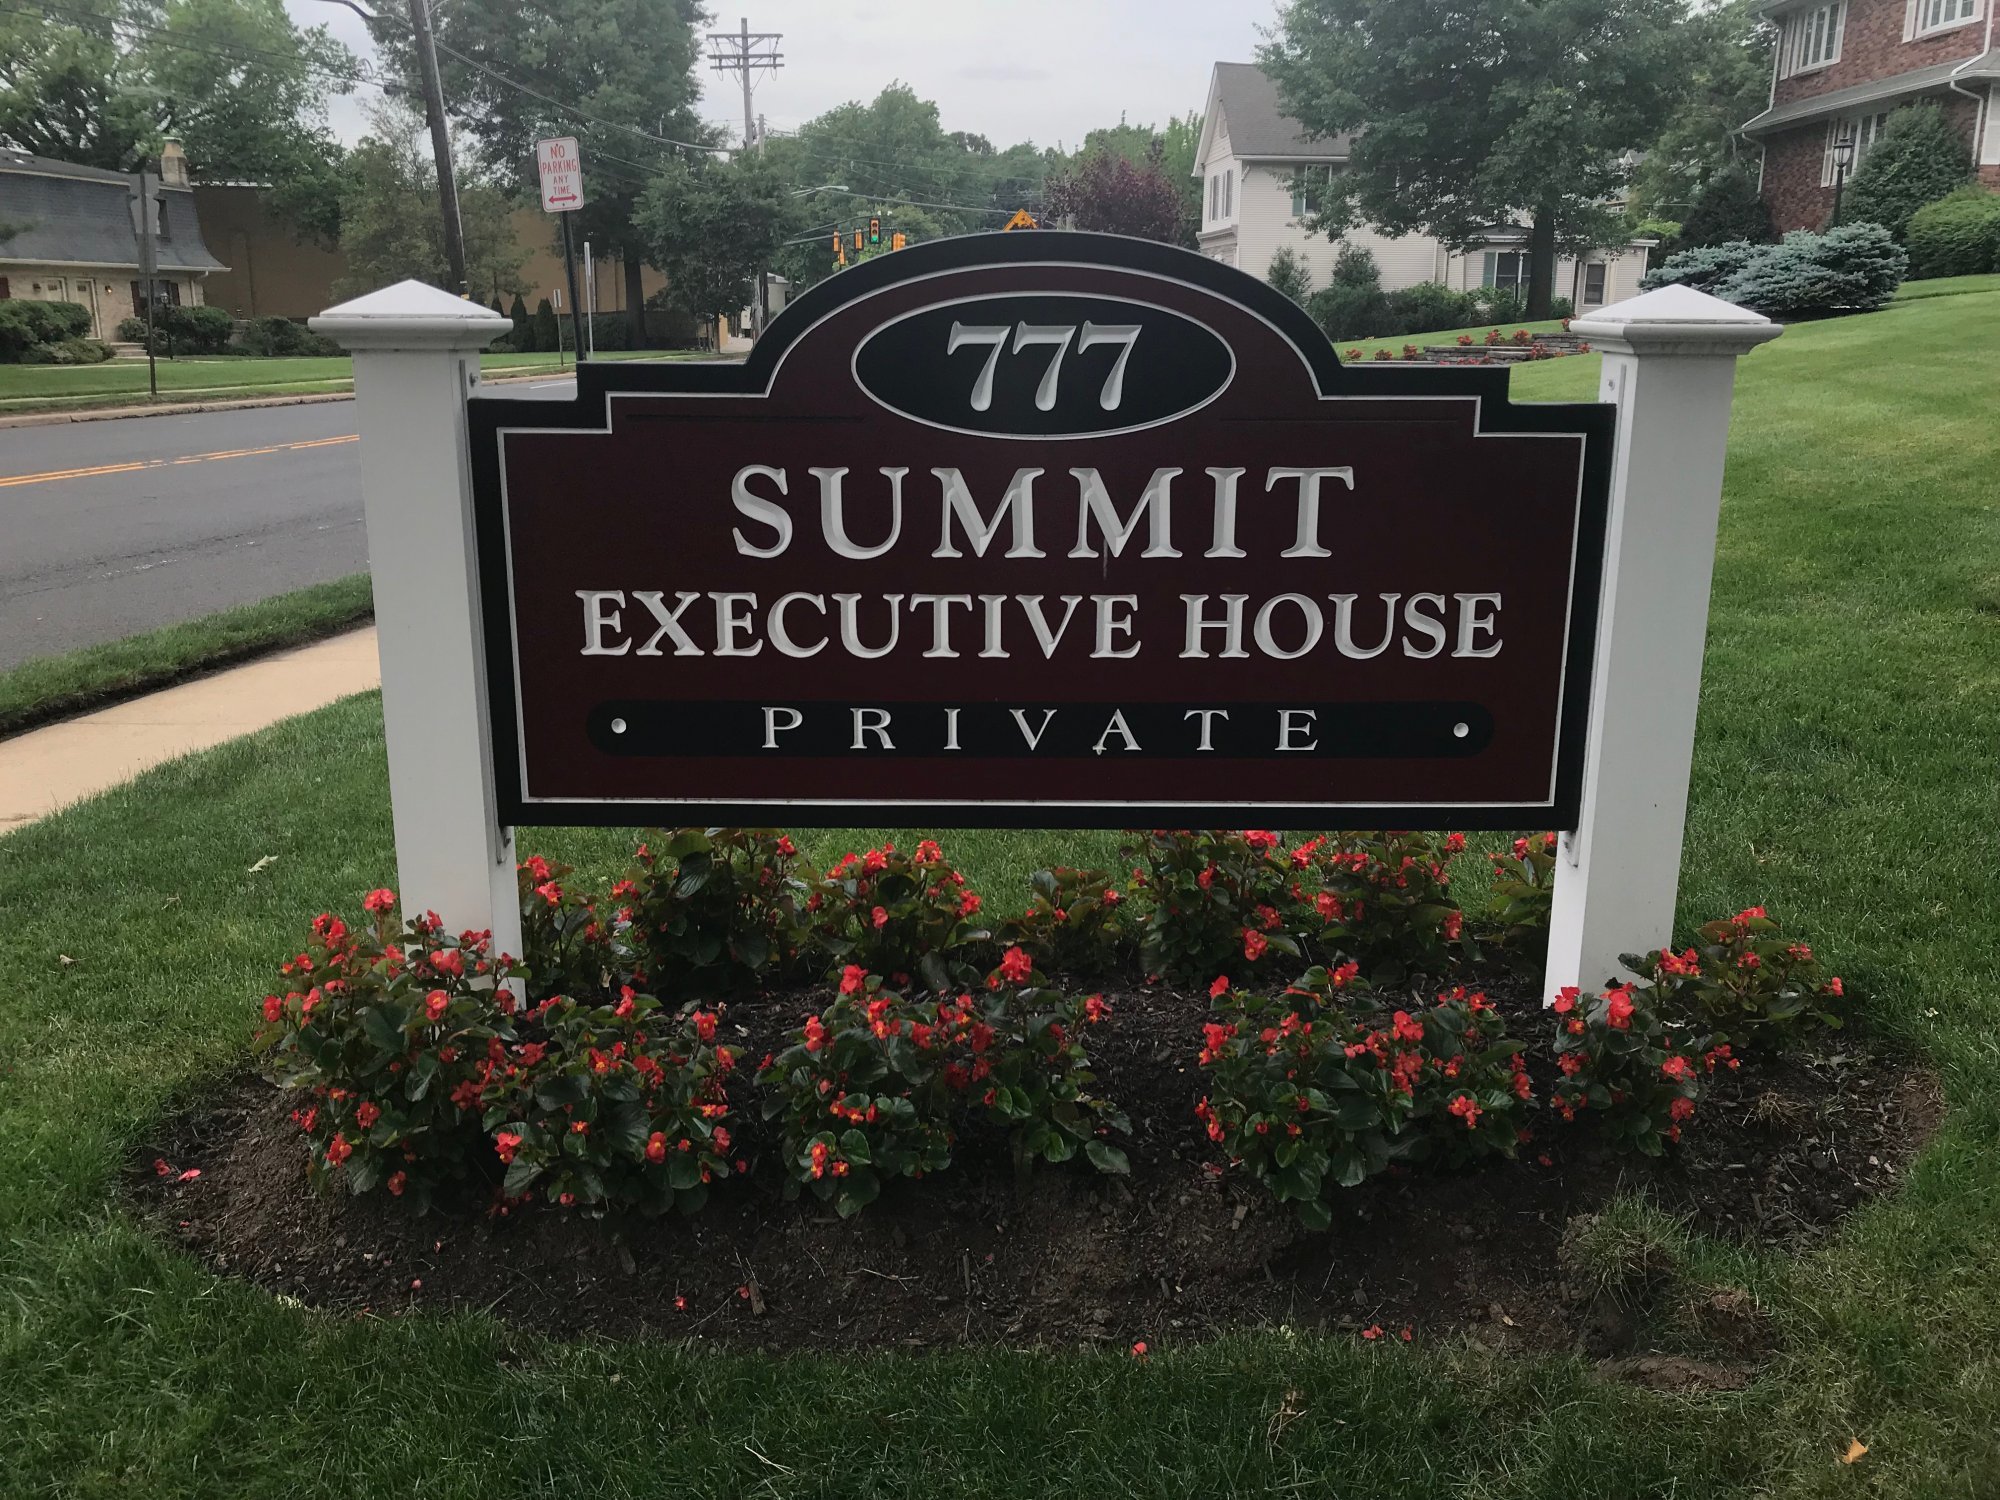 Townhomes for sale Summit Executive House Townhomes Summit, NJ